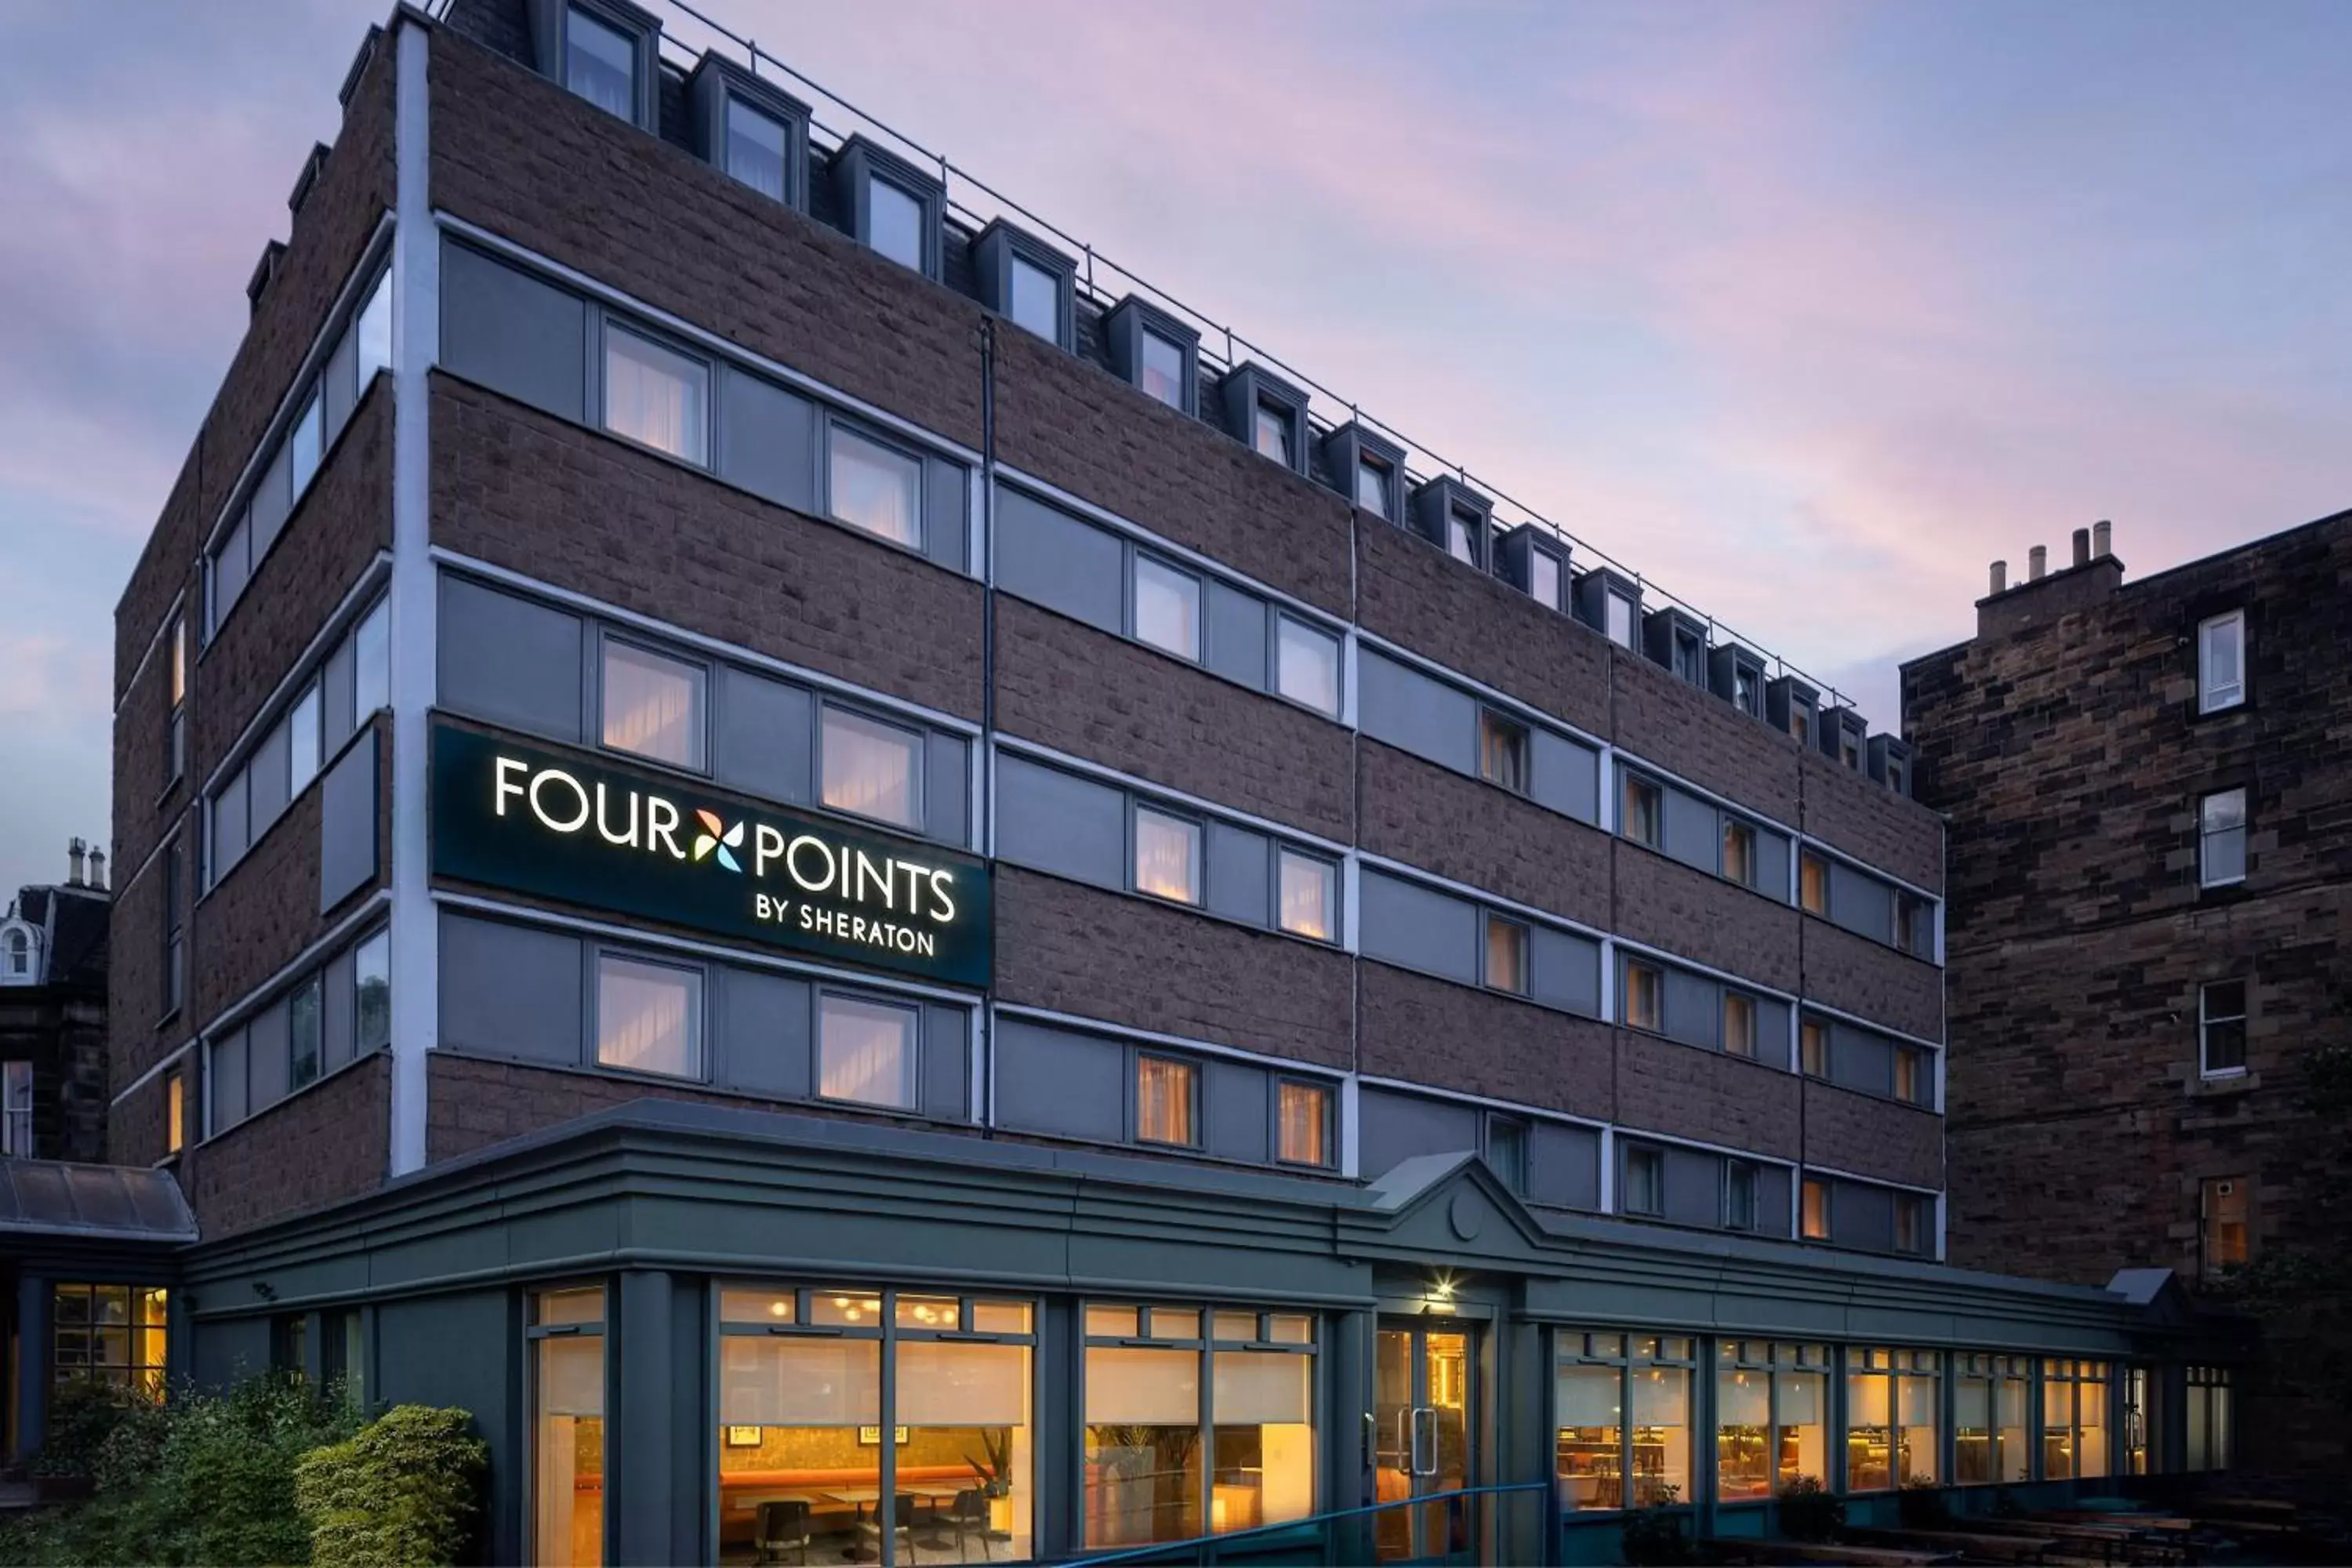 Property Building in Four Points by Sheraton Edinburgh